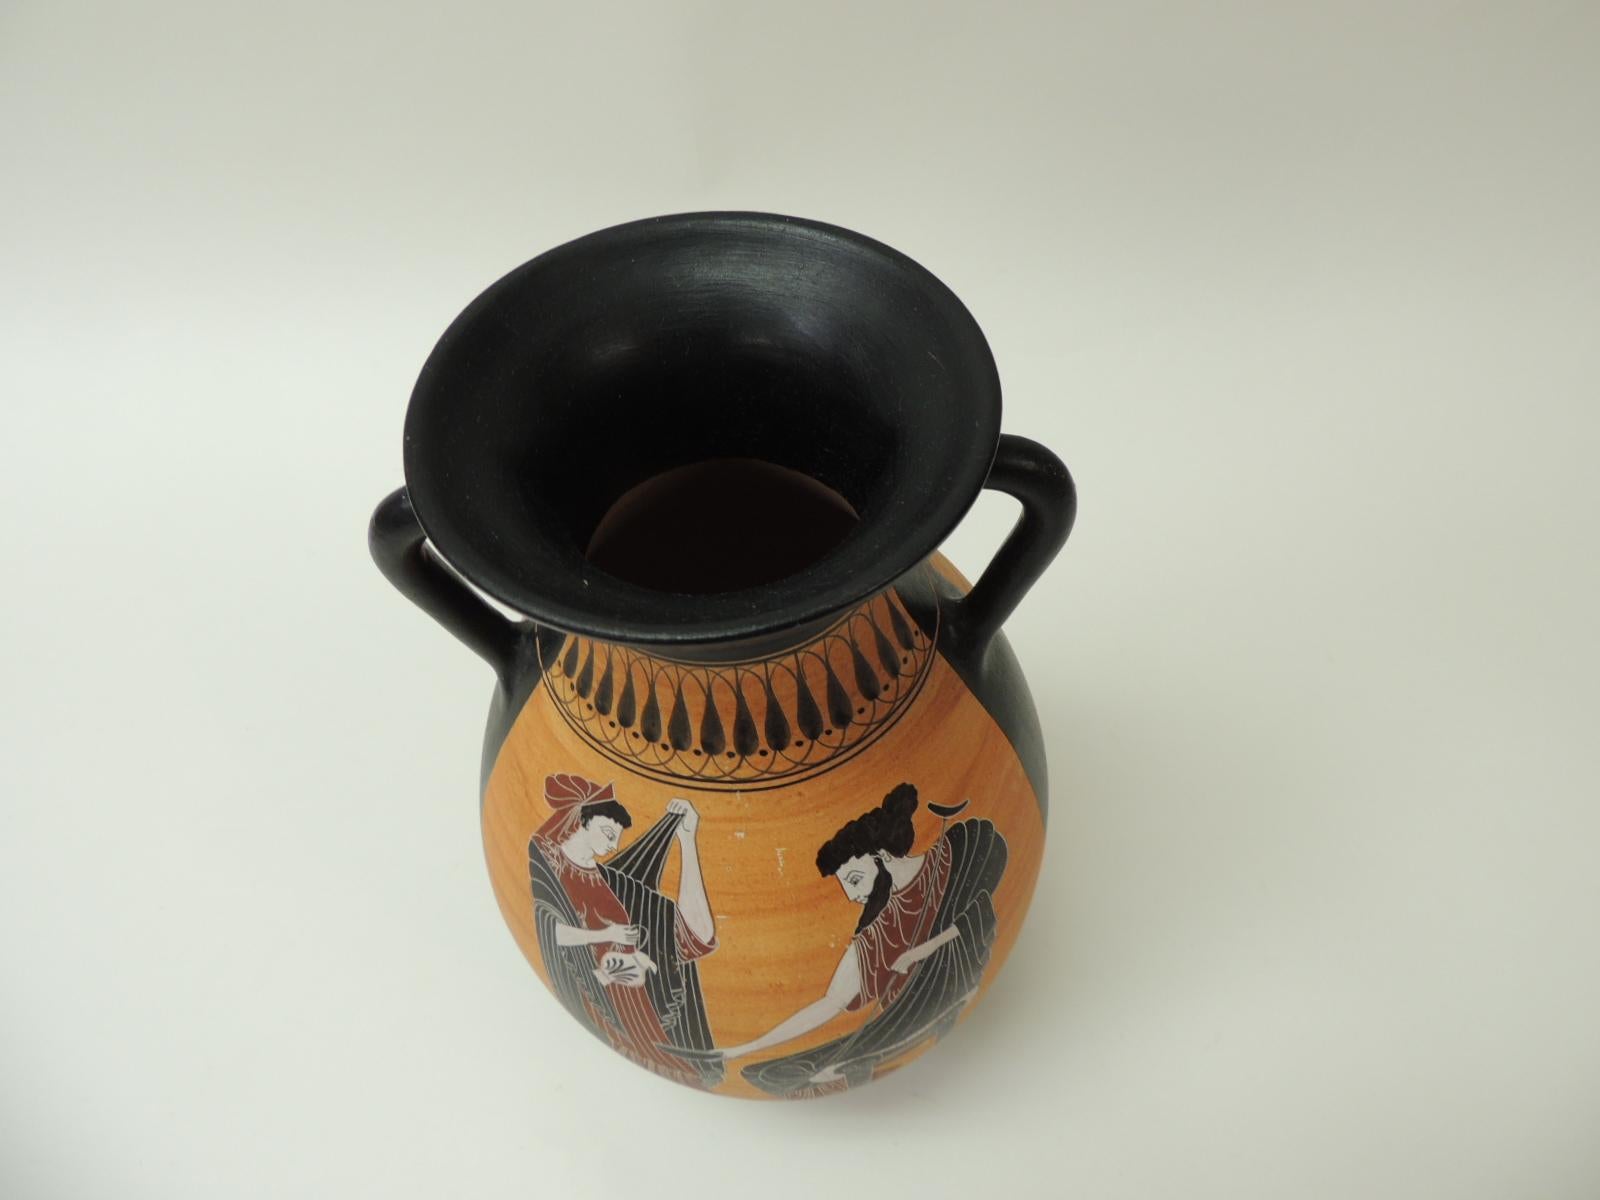 Vintage encaustic hand painted terracotta Greek water jug with handle. Tall hand painted jar depicting traditional Greek mythology figures and Greek key pattern in shades of white, black, pink, orange and gold. 
Encaustic painting, also known as